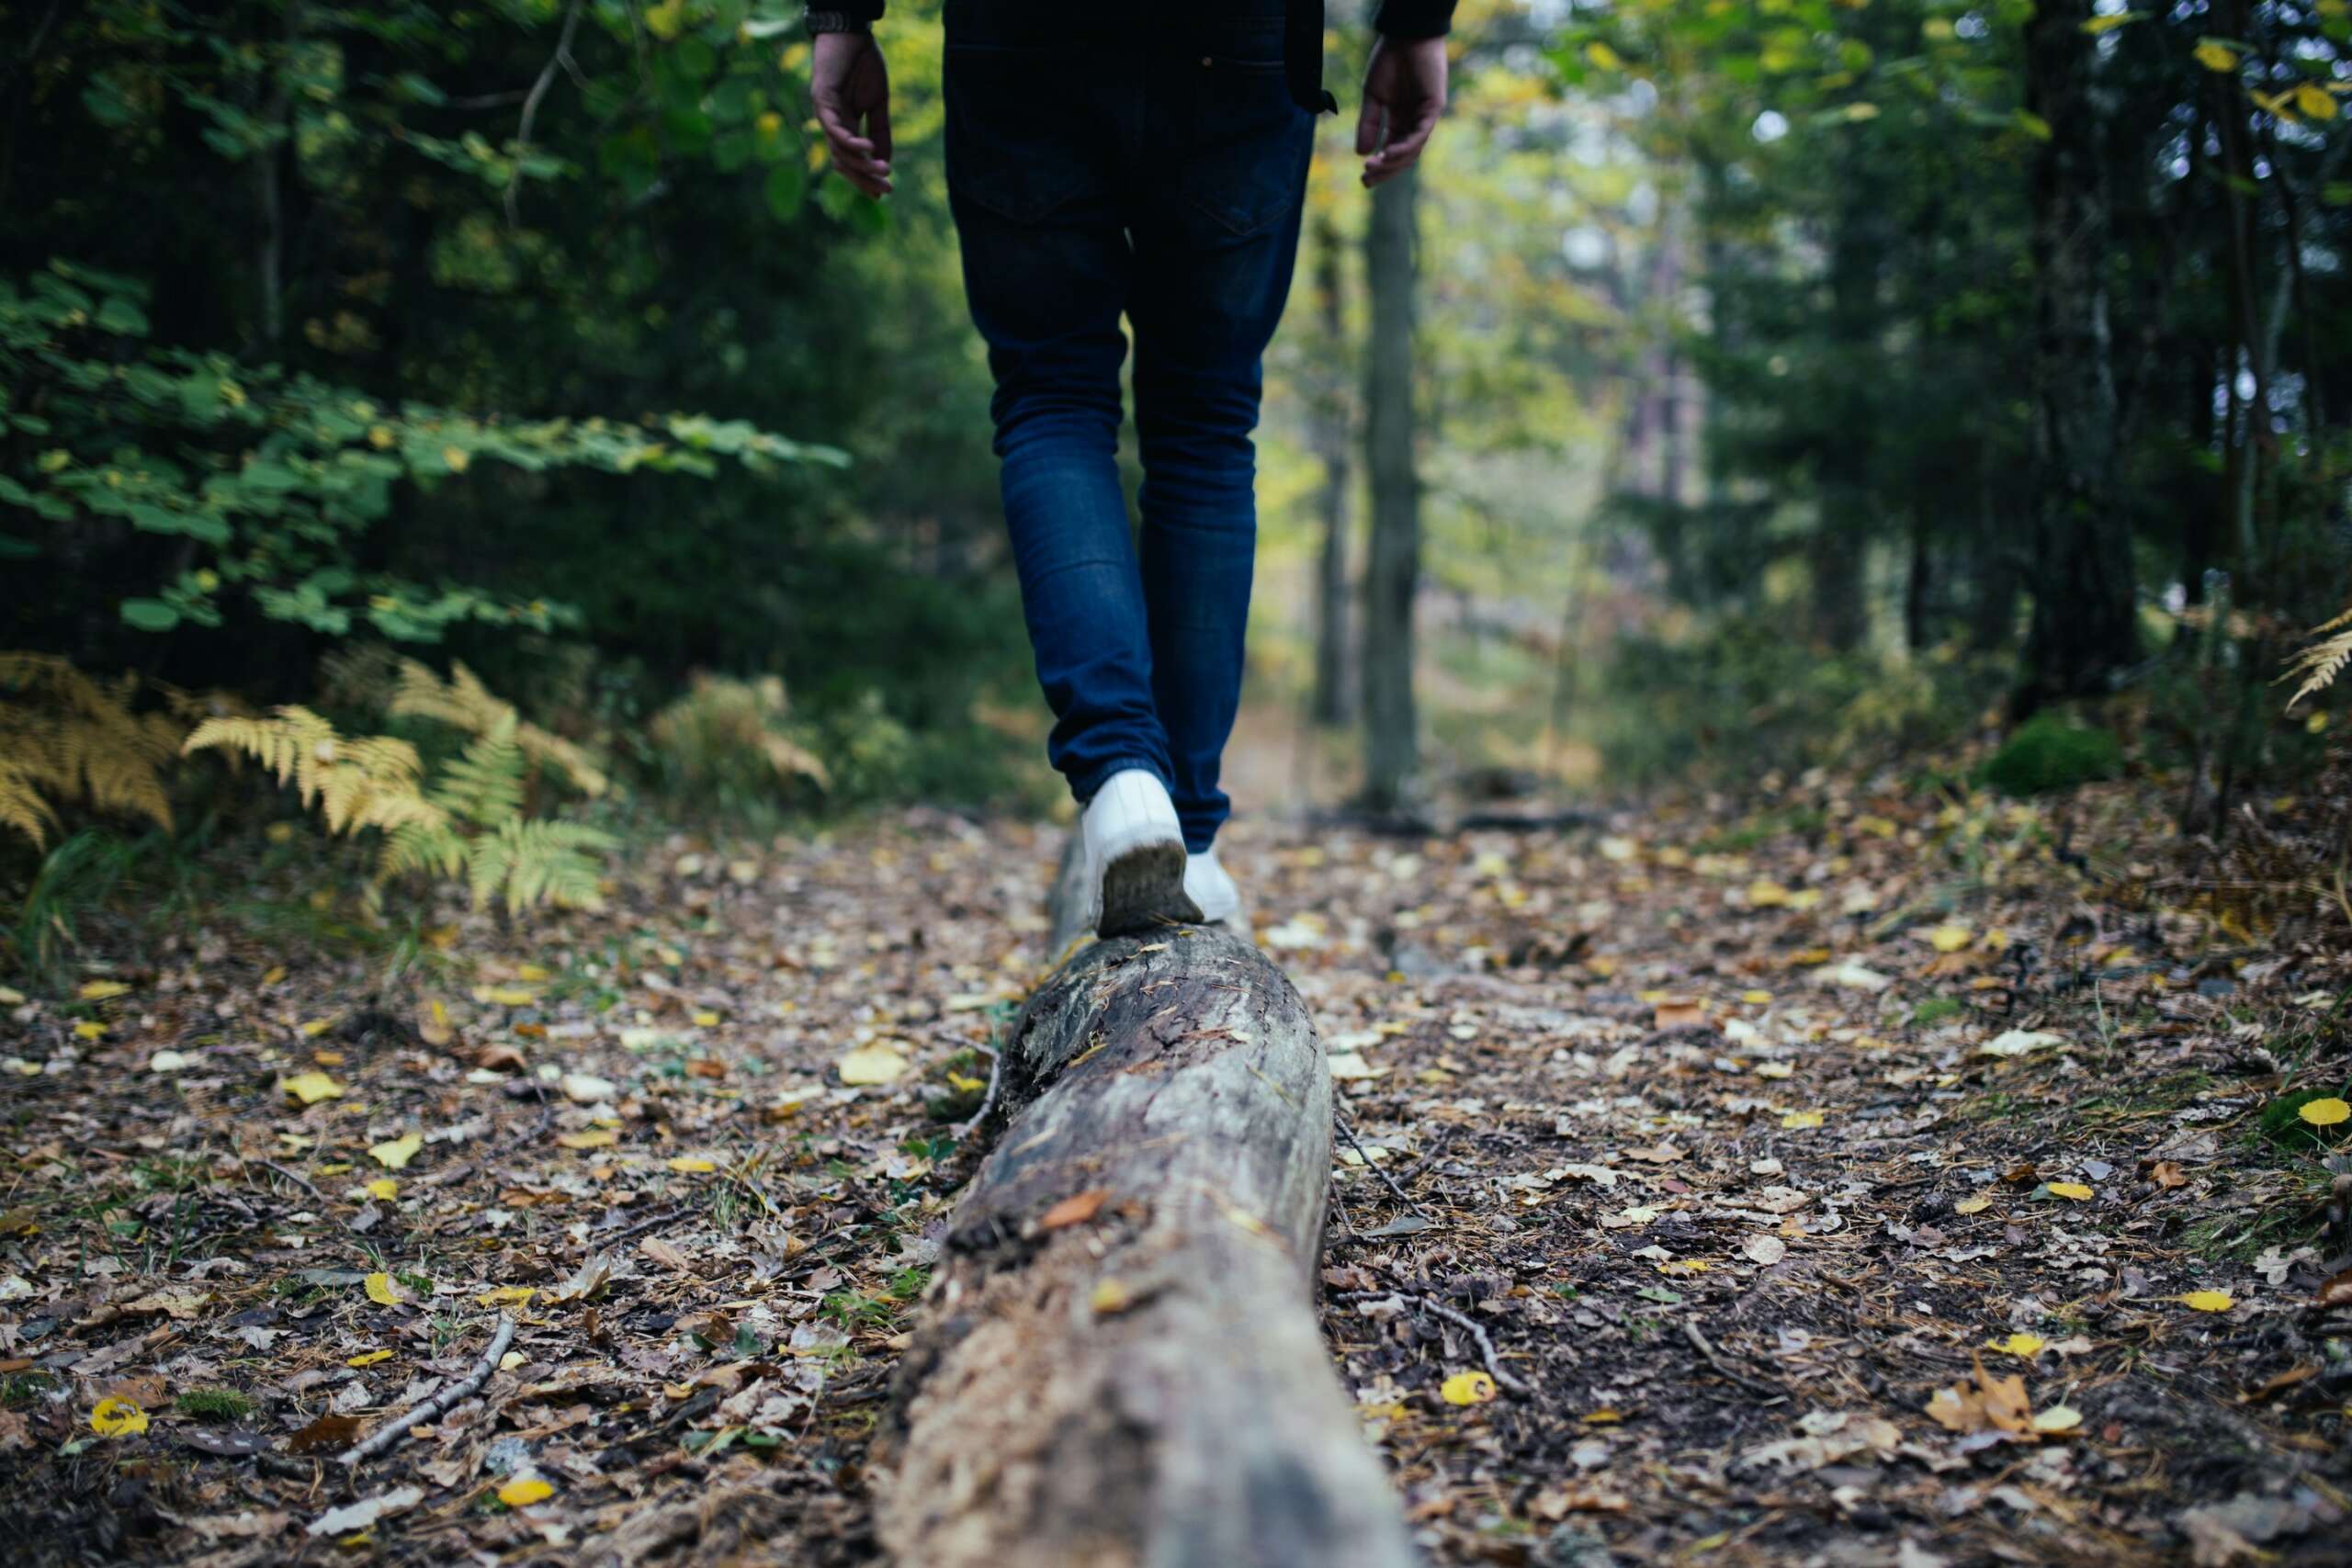 Picture of a person's legs balancing on a log in a forest